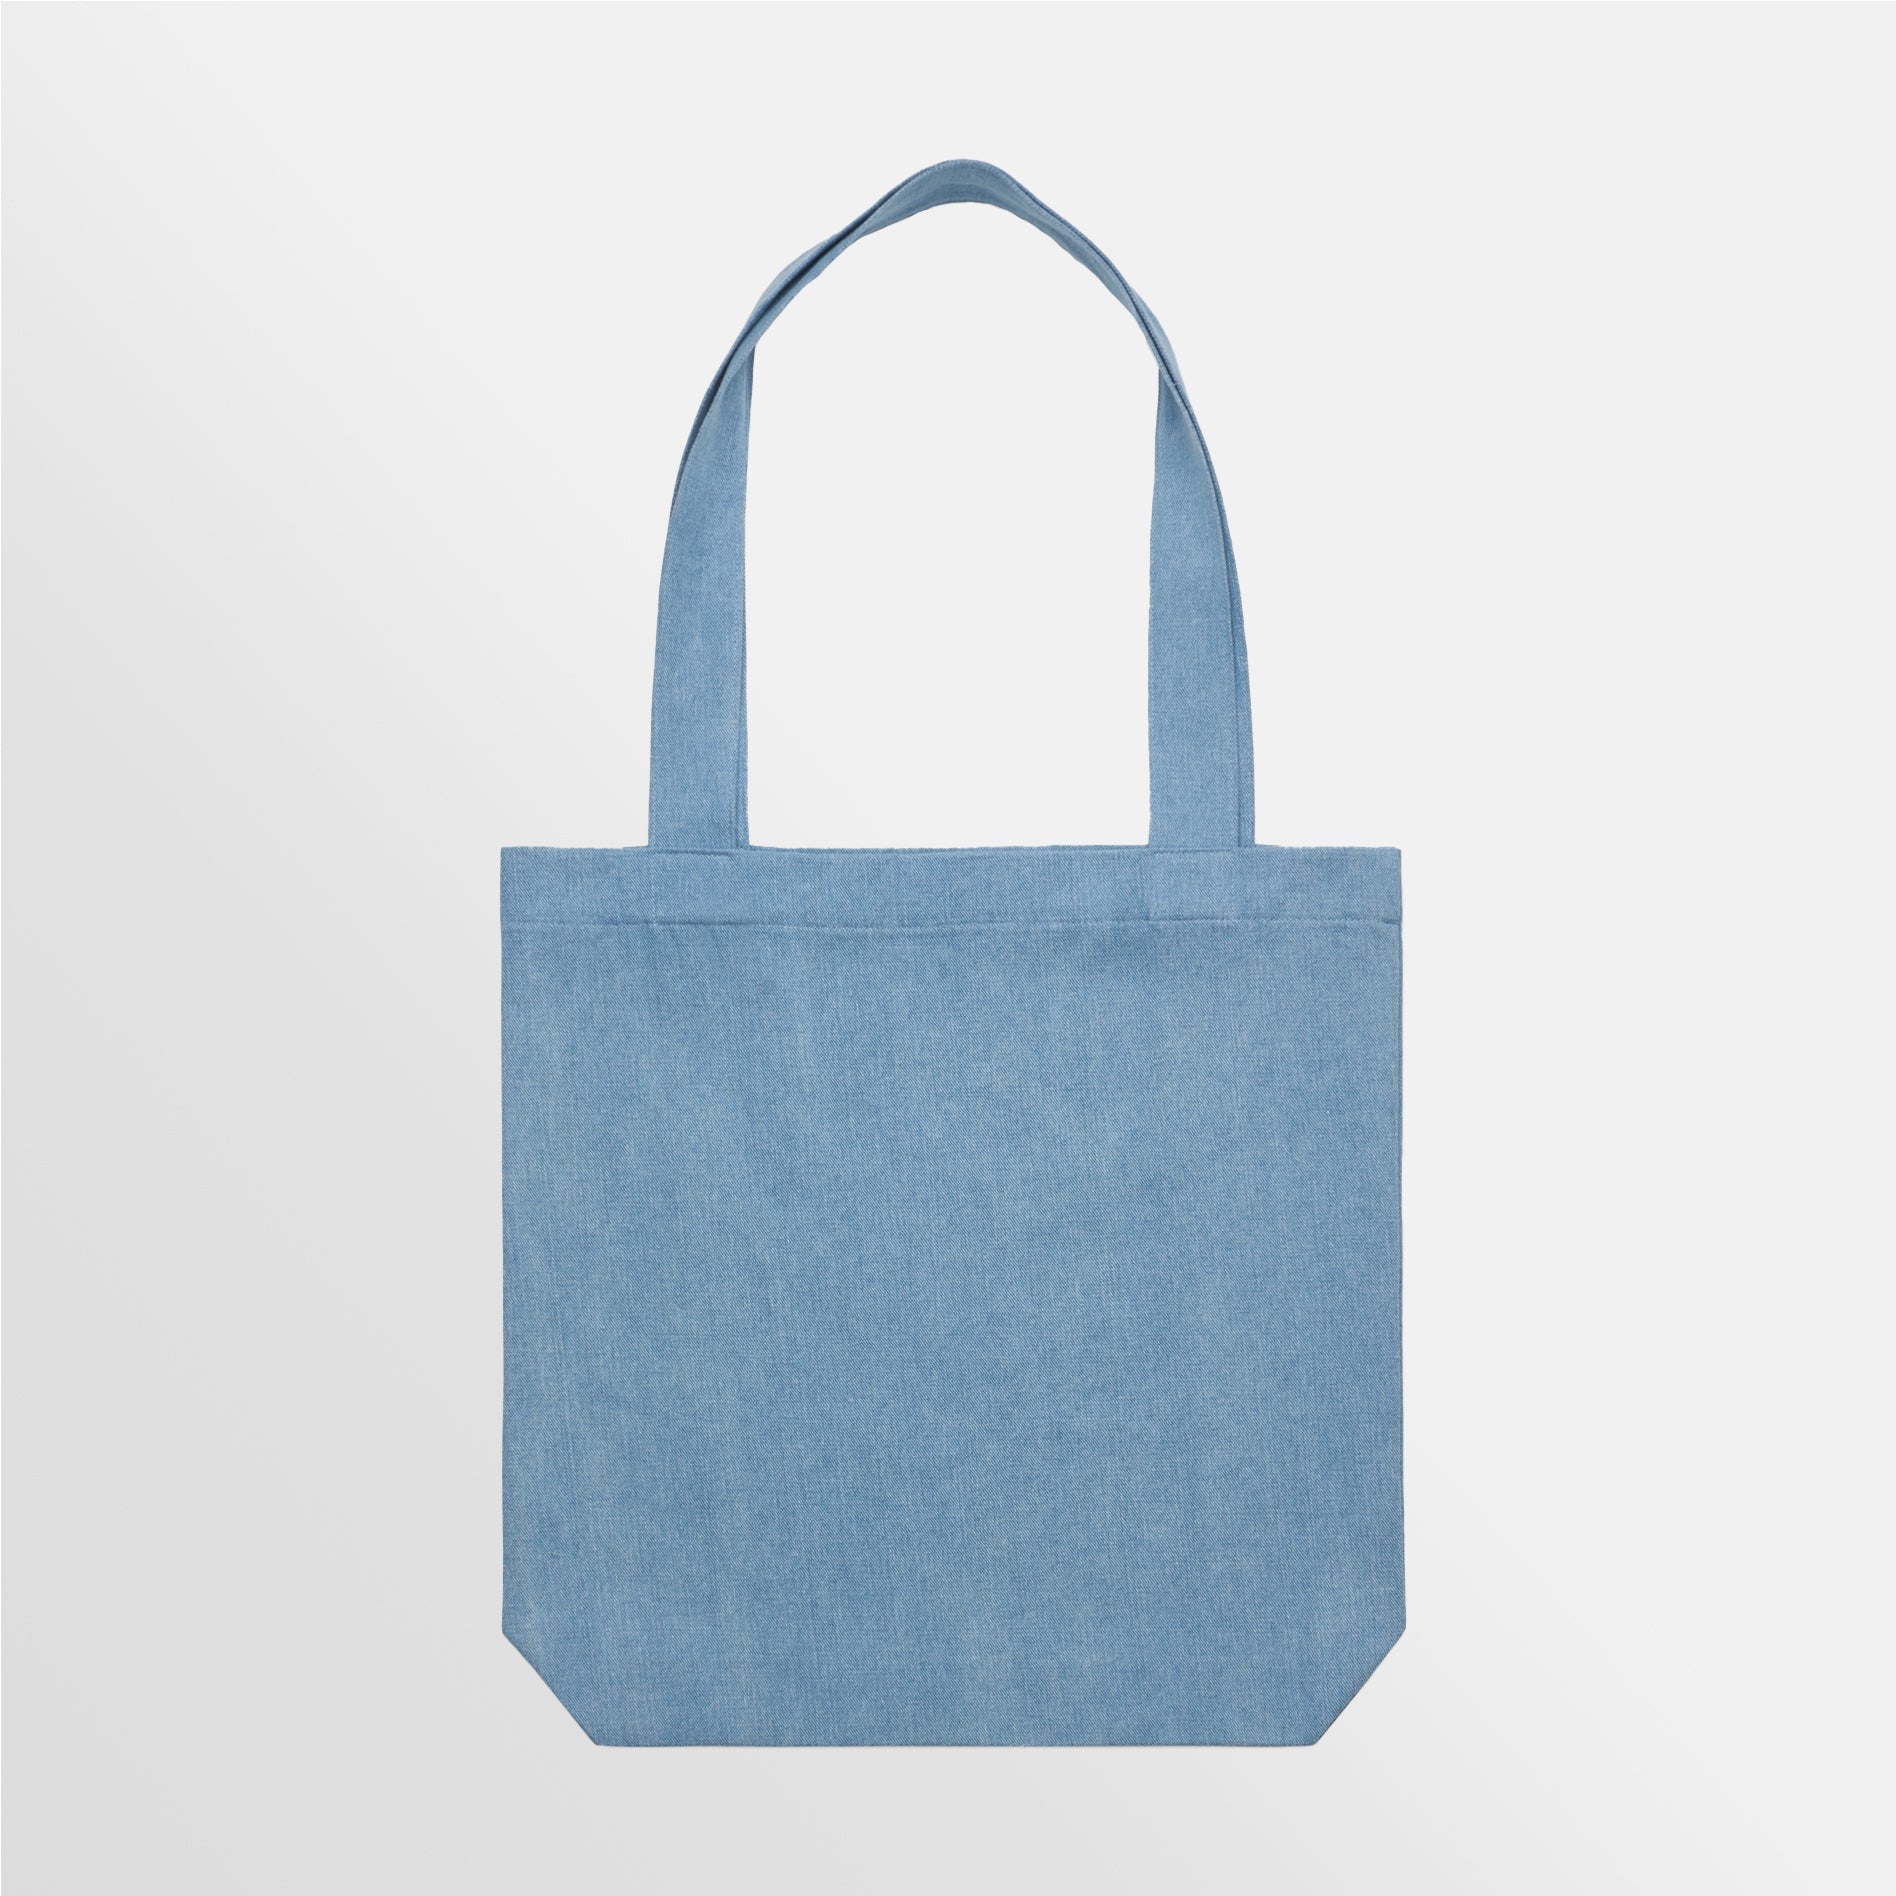 Native Cotton Canvas Tote Bag-Blank Totally Promotional